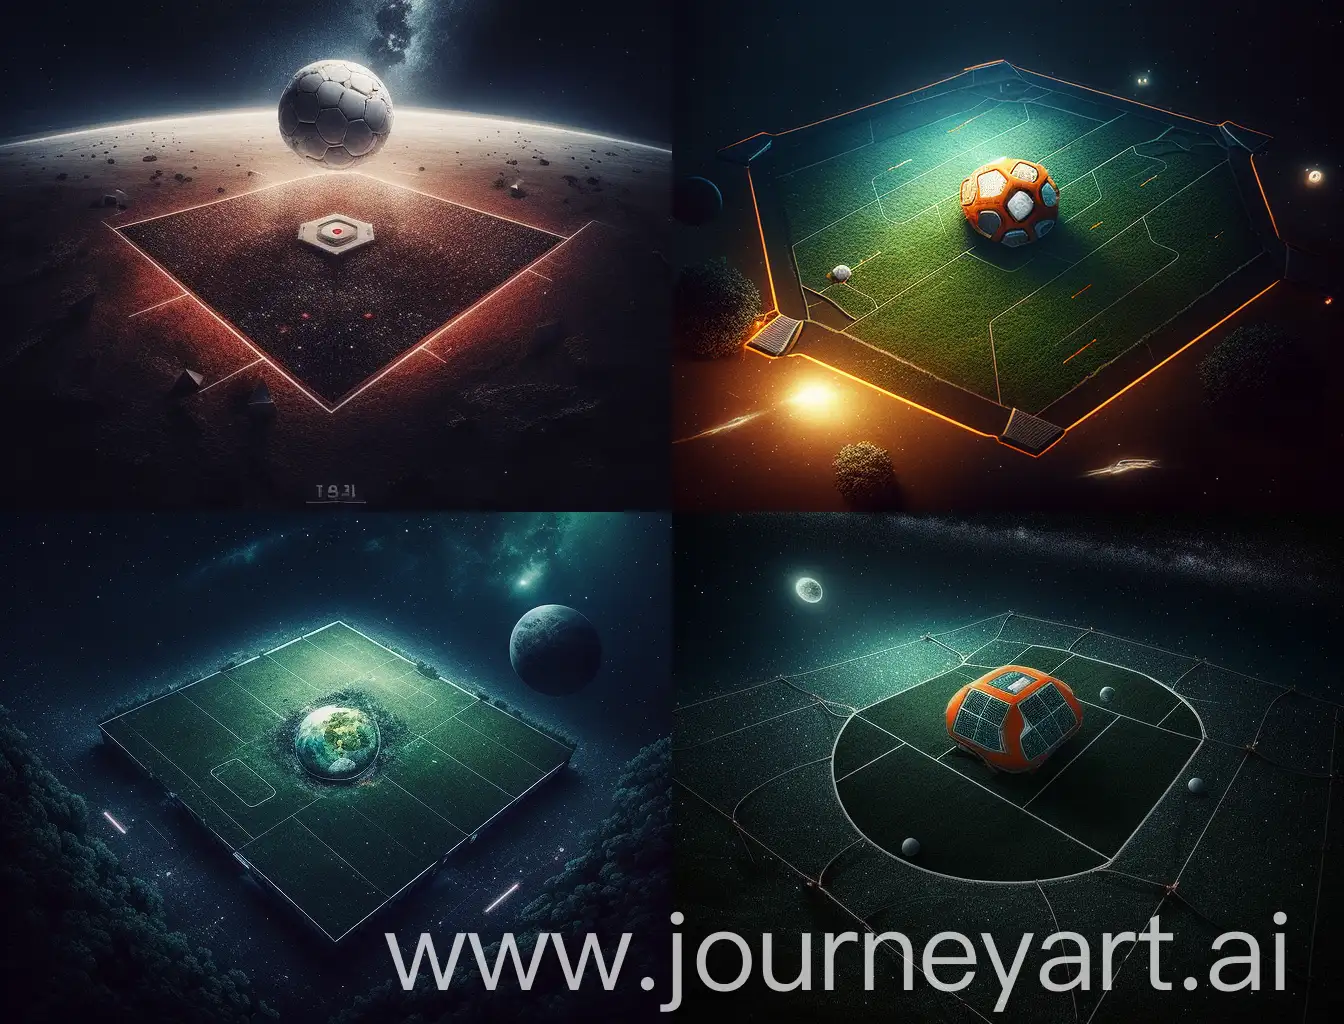 Futuristic-Space-Soccer-Field-Match-with-Vivid-Colors